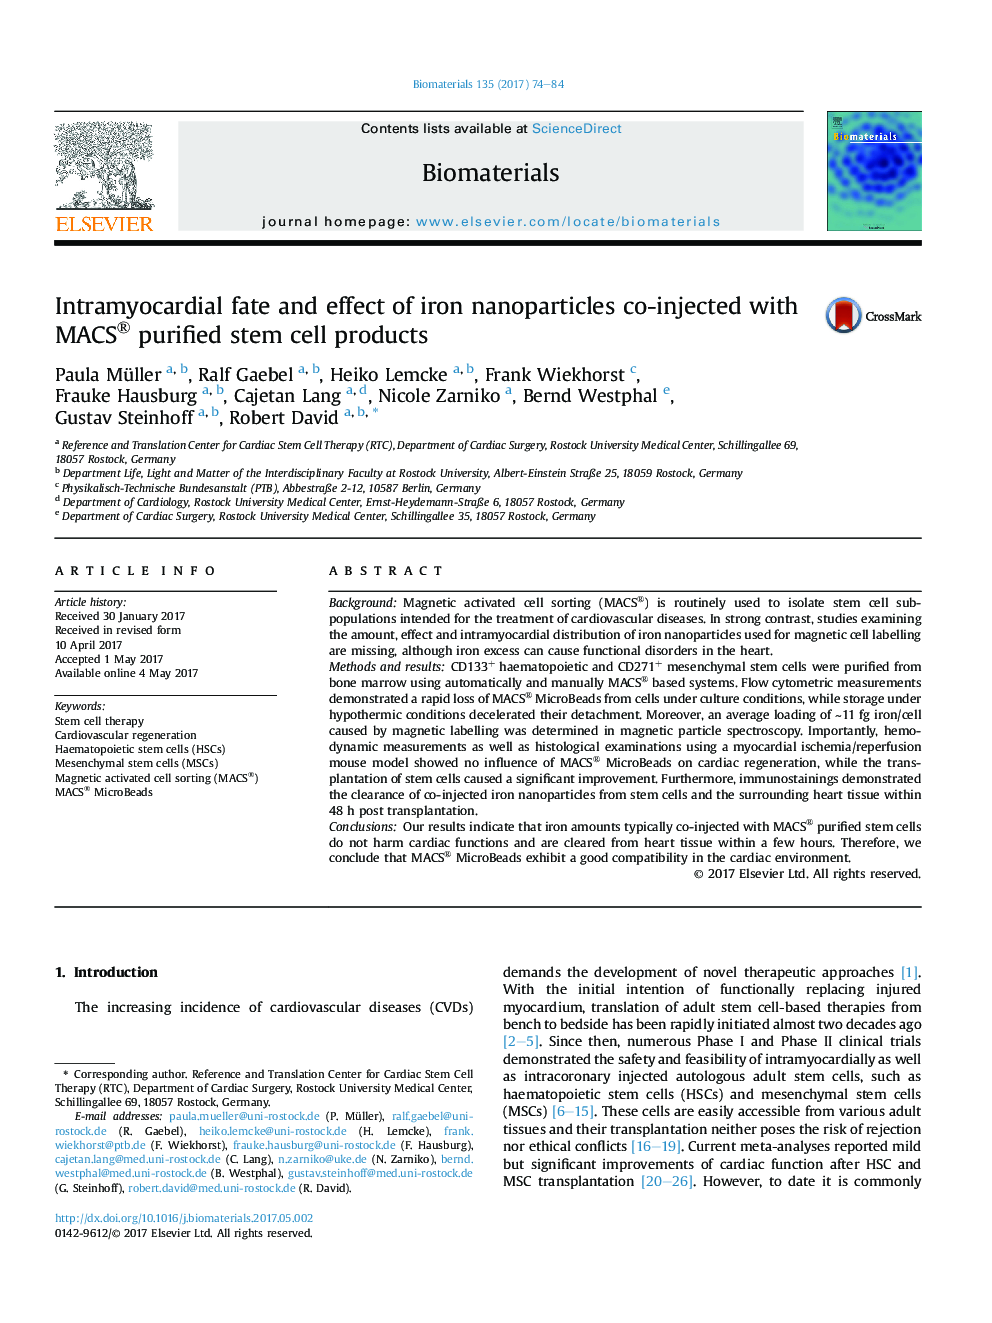 Intramyocardial fate and effect of iron nanoparticles co-injected with MACS® purified stem cell products